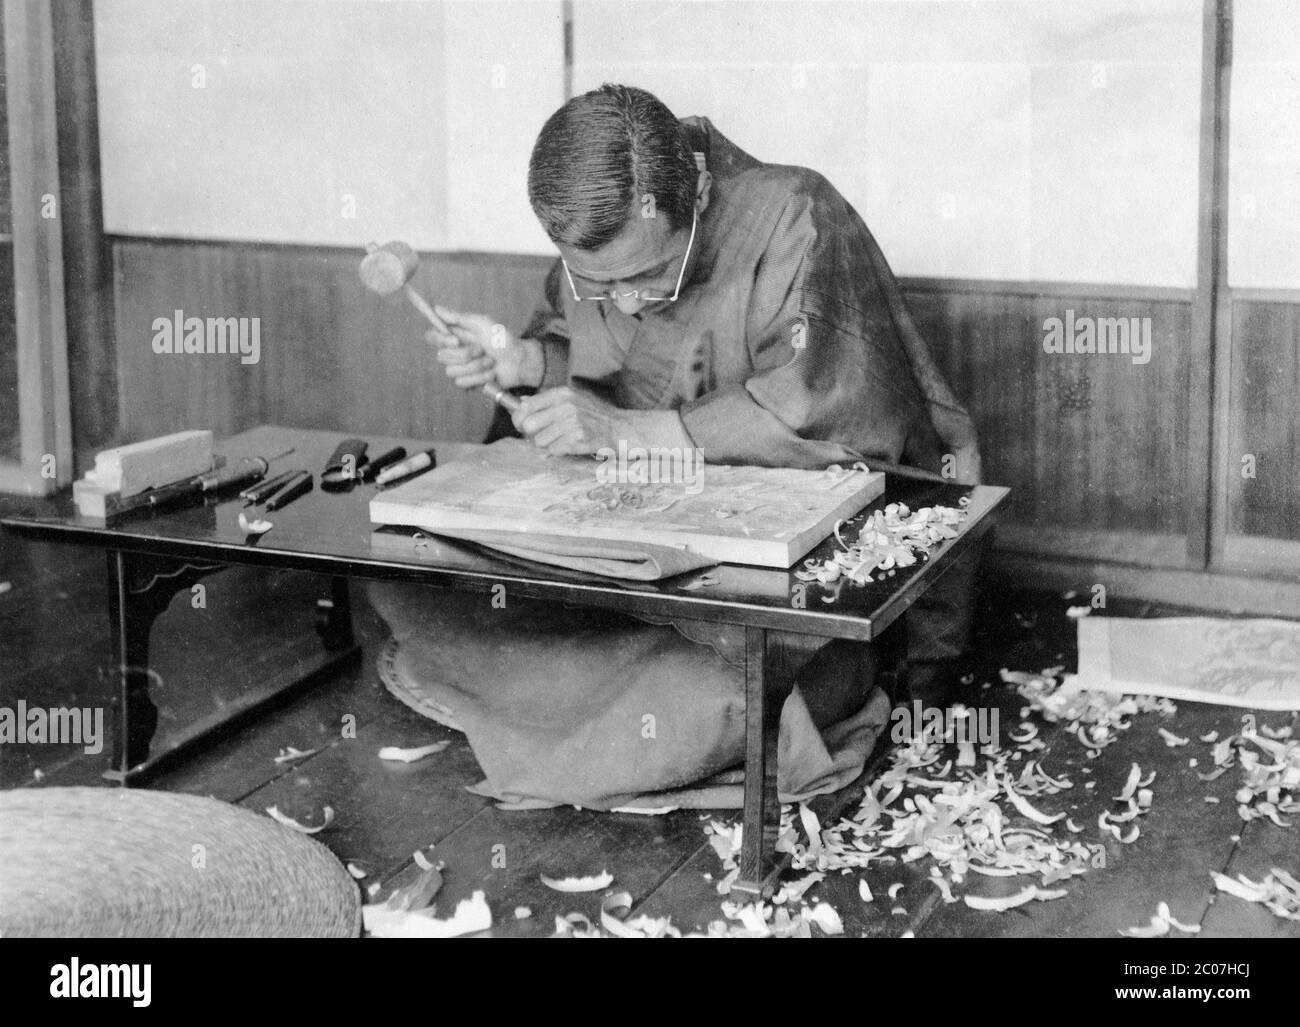 [ 1910s Japan - Japanese Woodblock Artist ] — A Japanese artists is using a hammer and chisel to carve a woodblock for ukiyoe printing.  20th century vintage gelatin silver print. Stock Photo